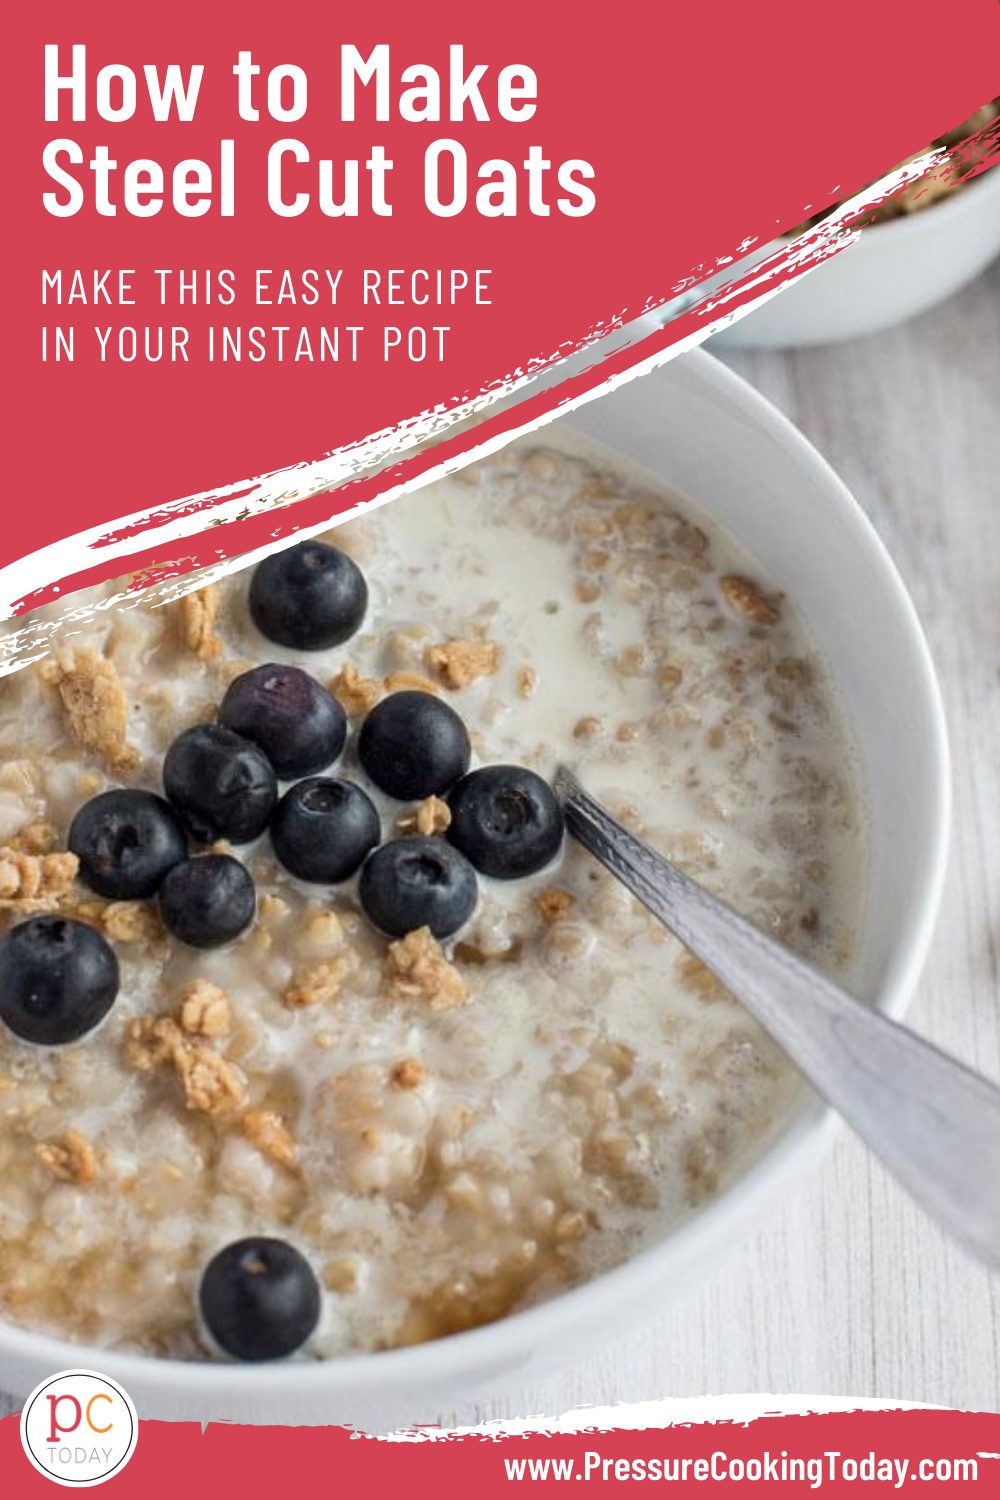 Pinterest image promoting Instant Pot Steel Cut Oats, with a pink background with white text that reads "make this easy recipe in your Instant Pot" and a close-up image of steel cut oats topped with blueberries and granola via @PressureCook2da